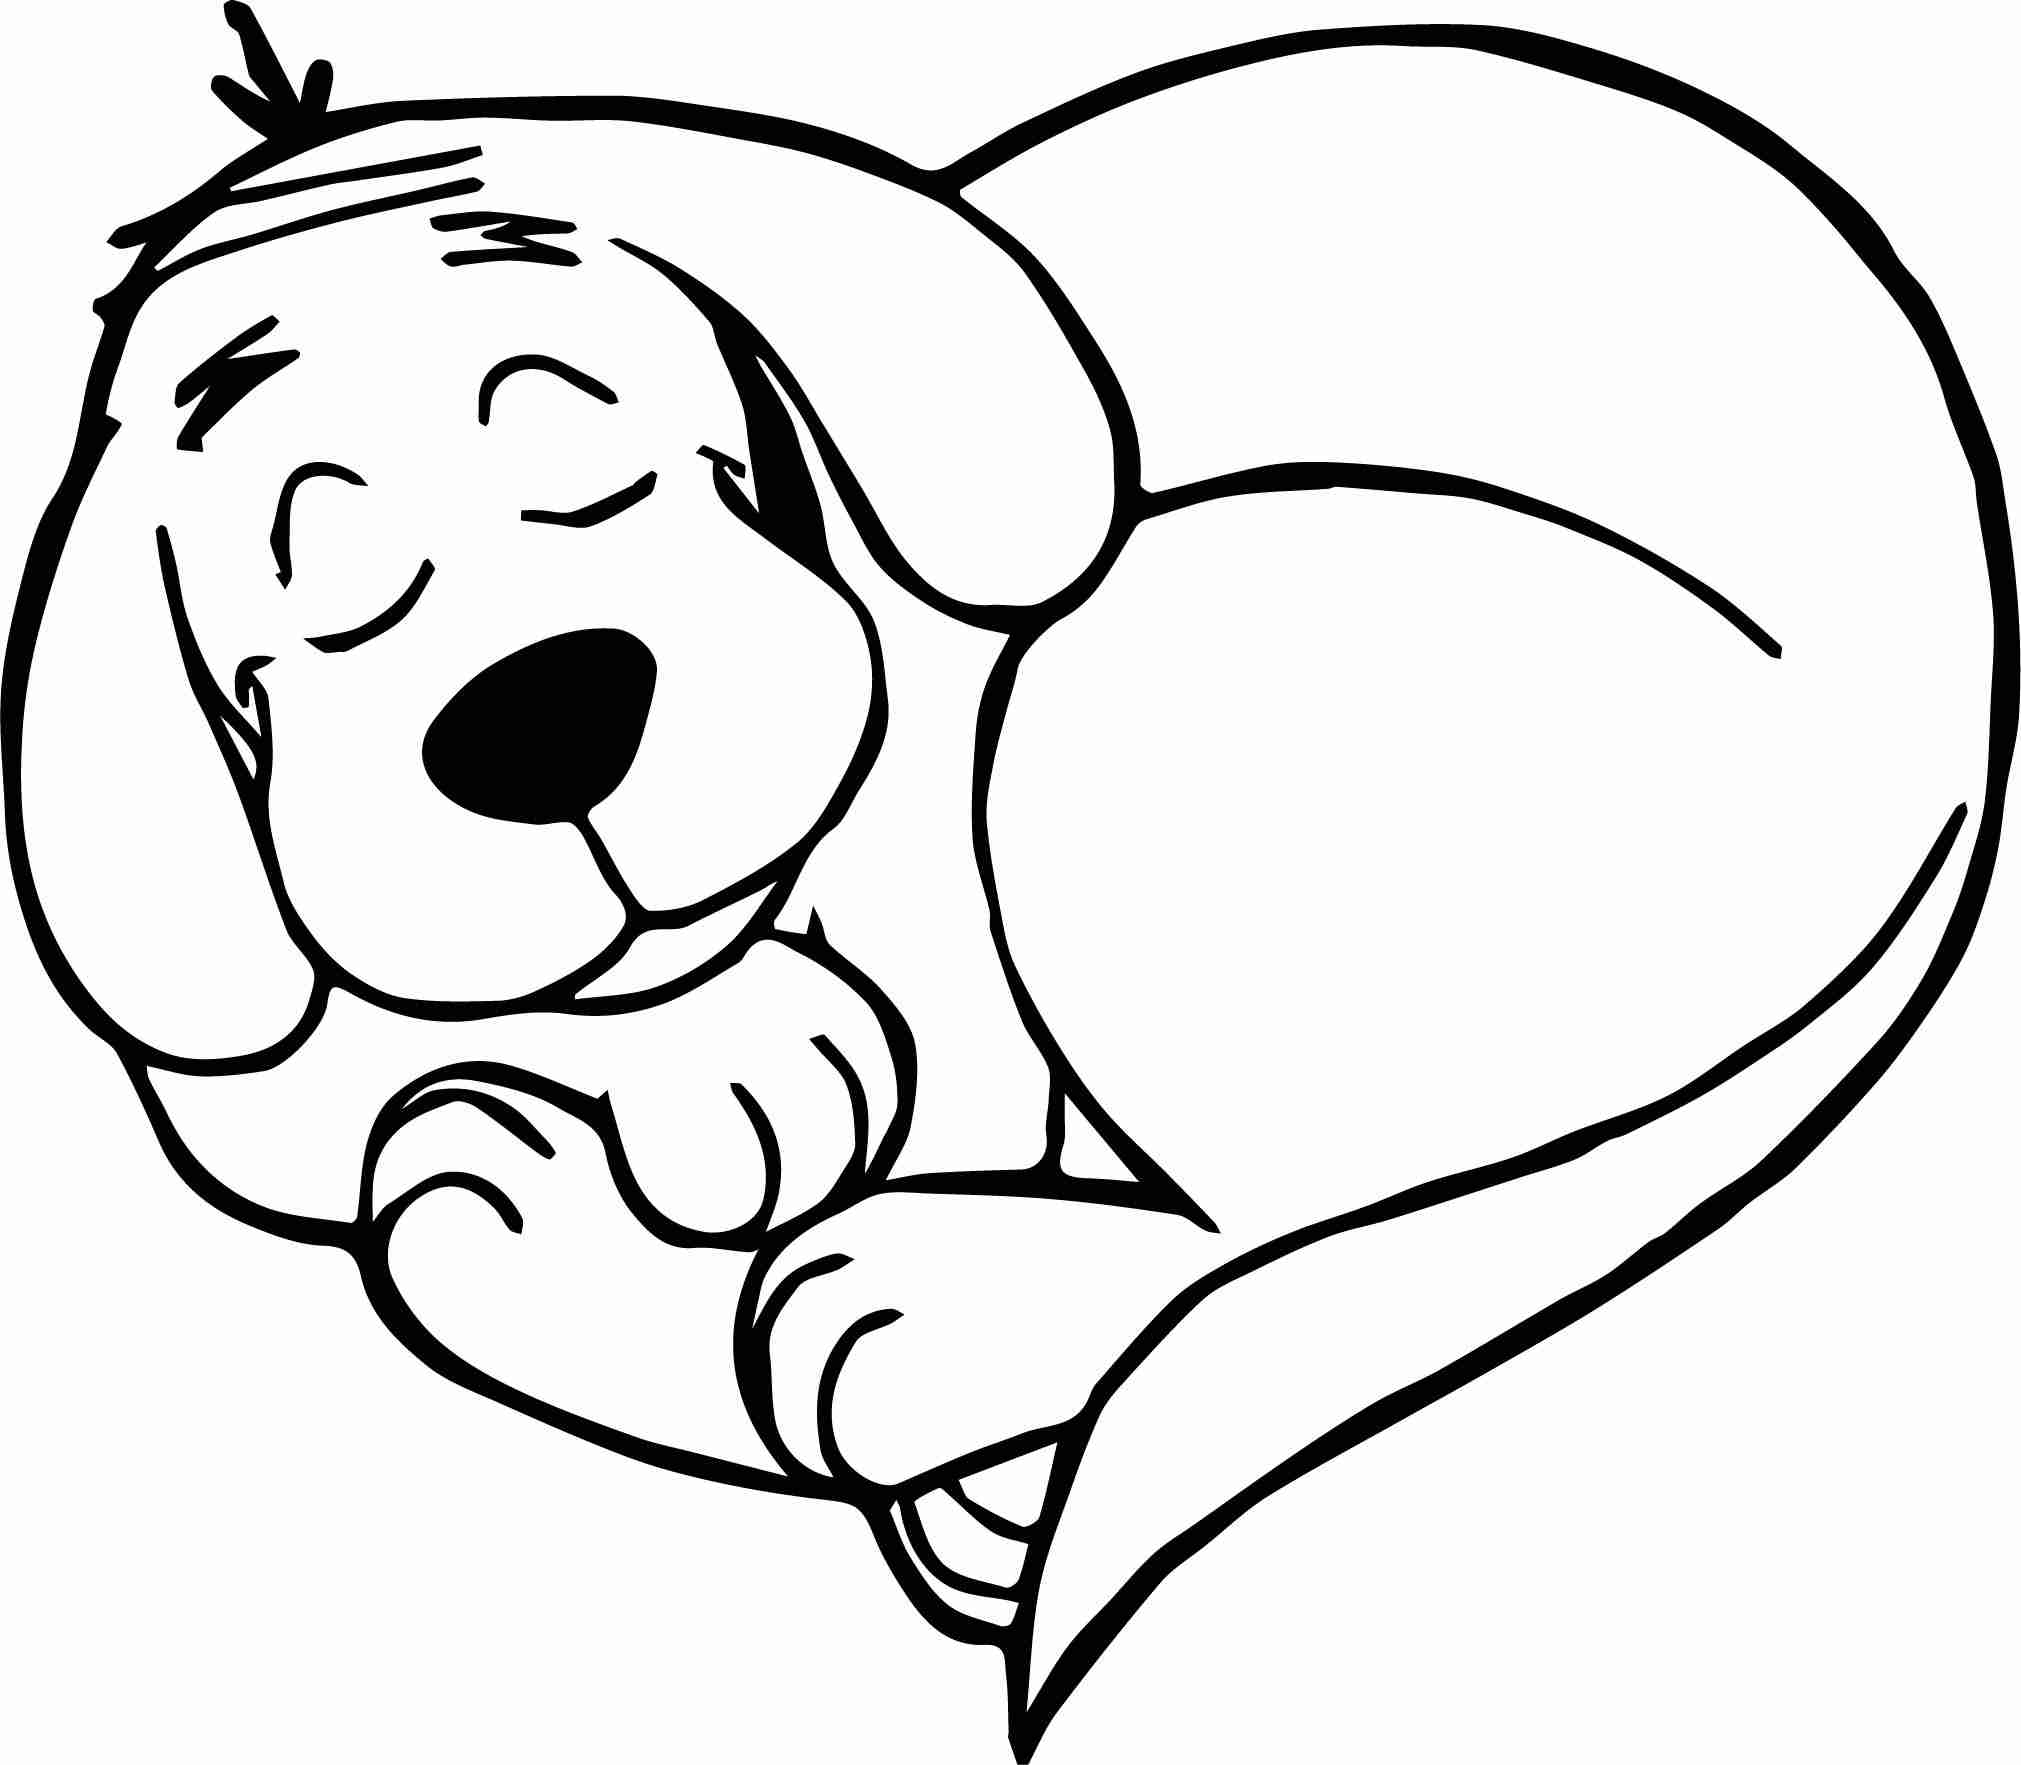 Clifford Coloring Pages at GetDrawings | Free download